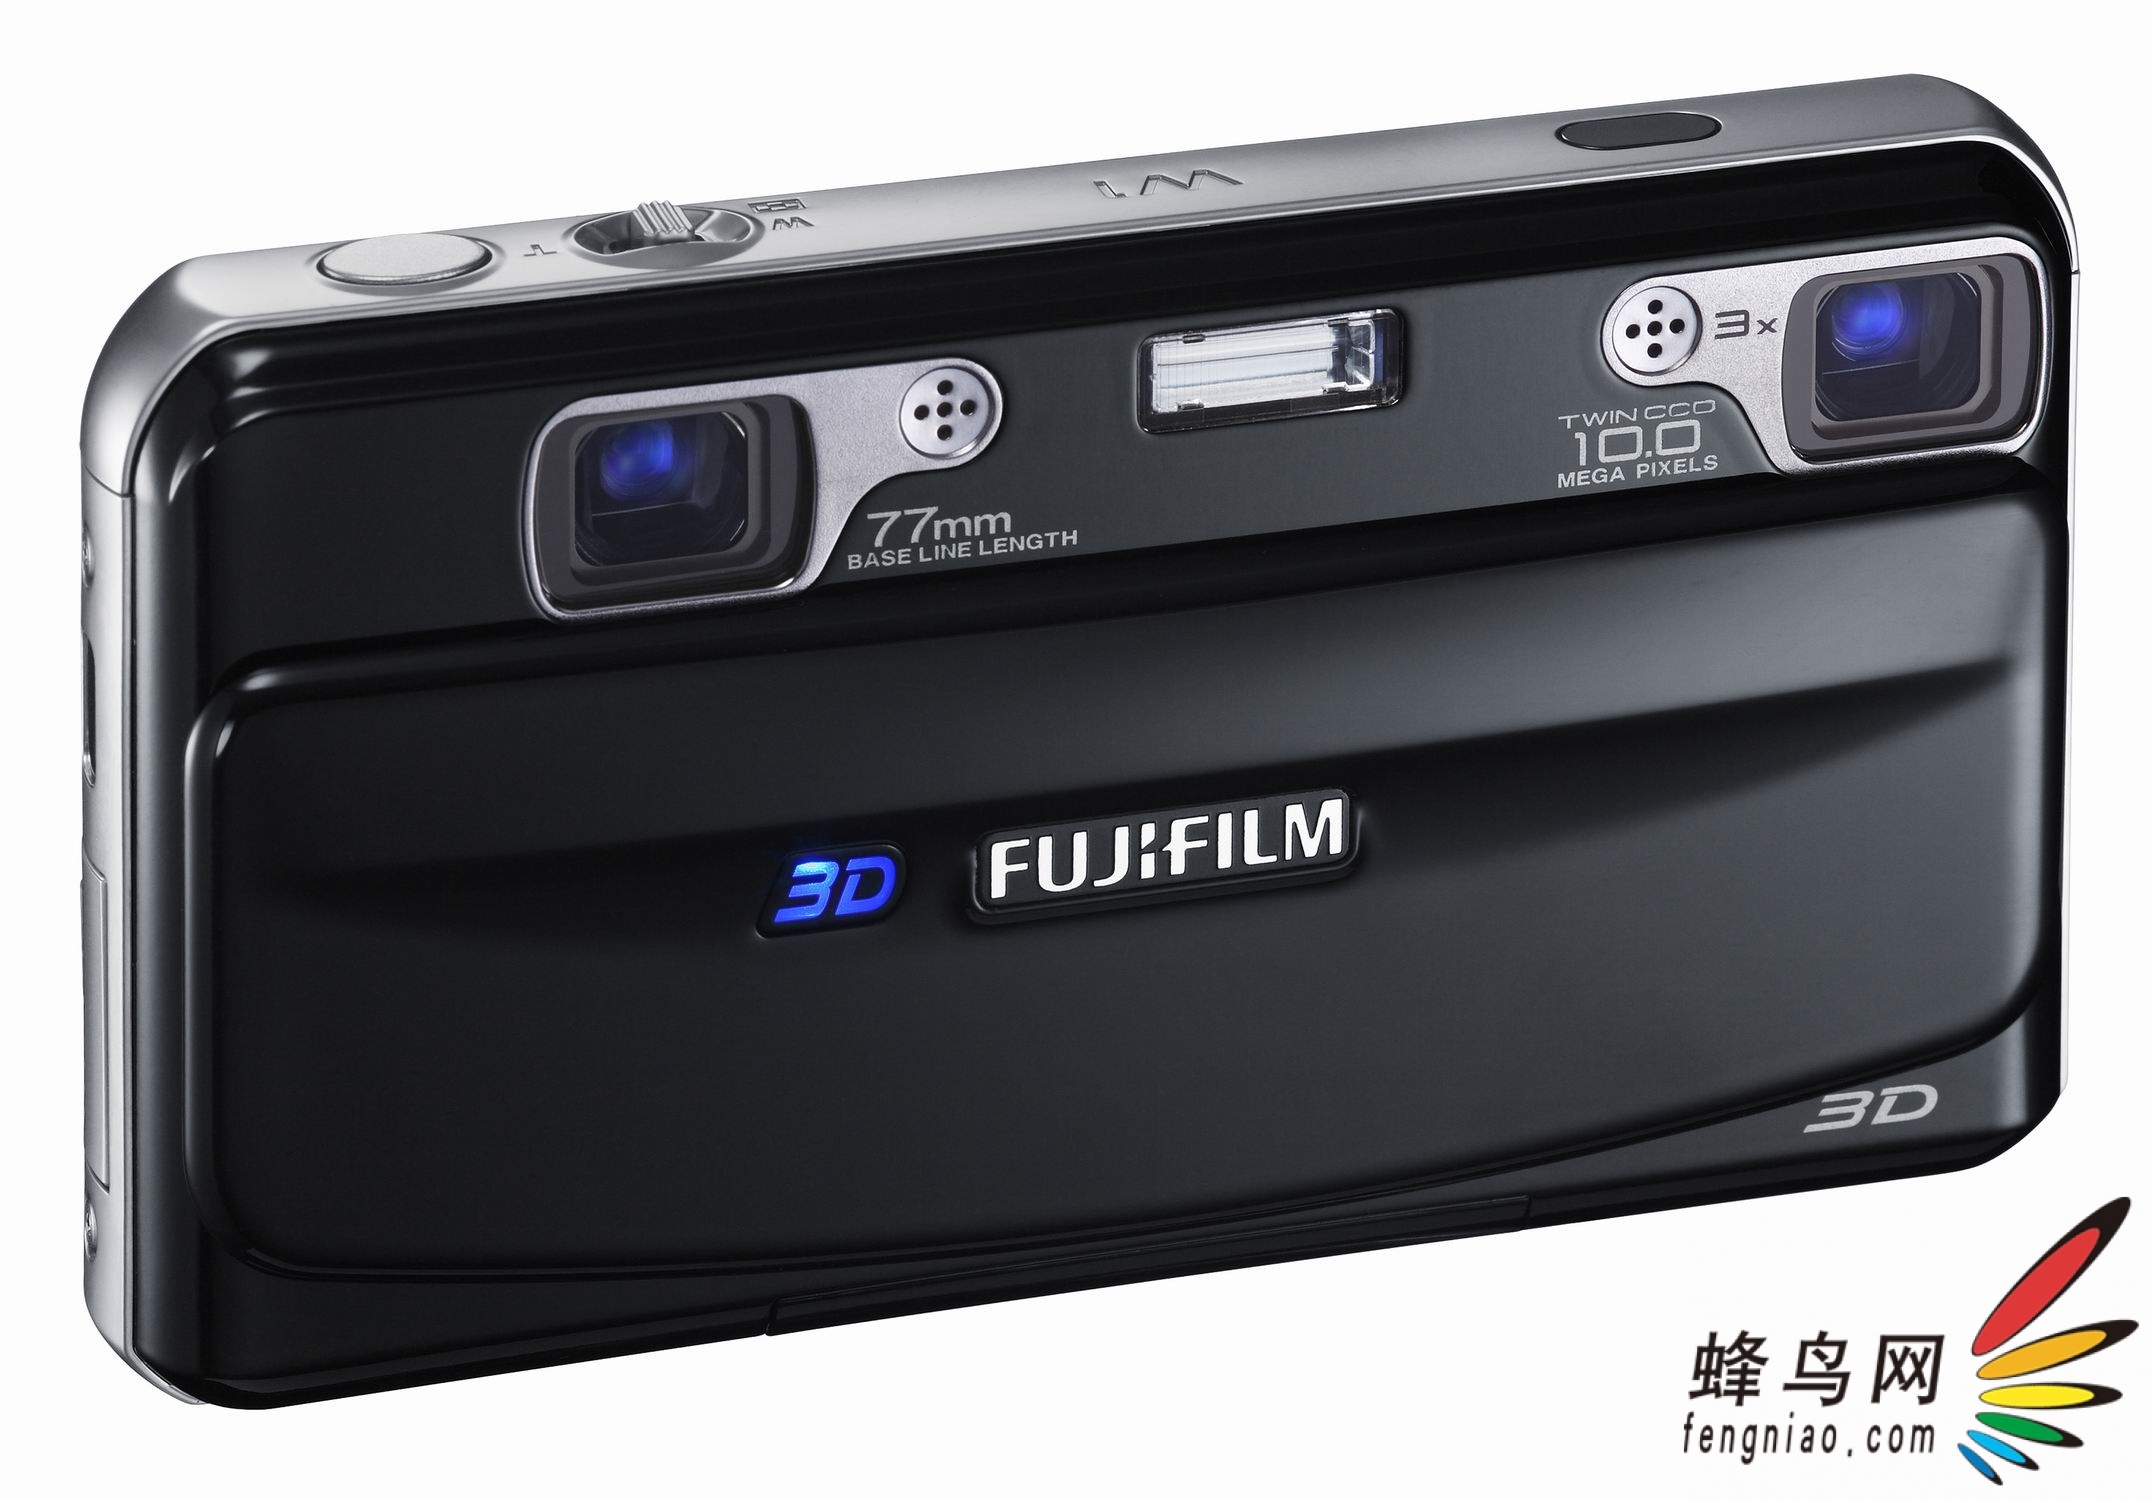 ʿ3DFinePix REAL 3D W1